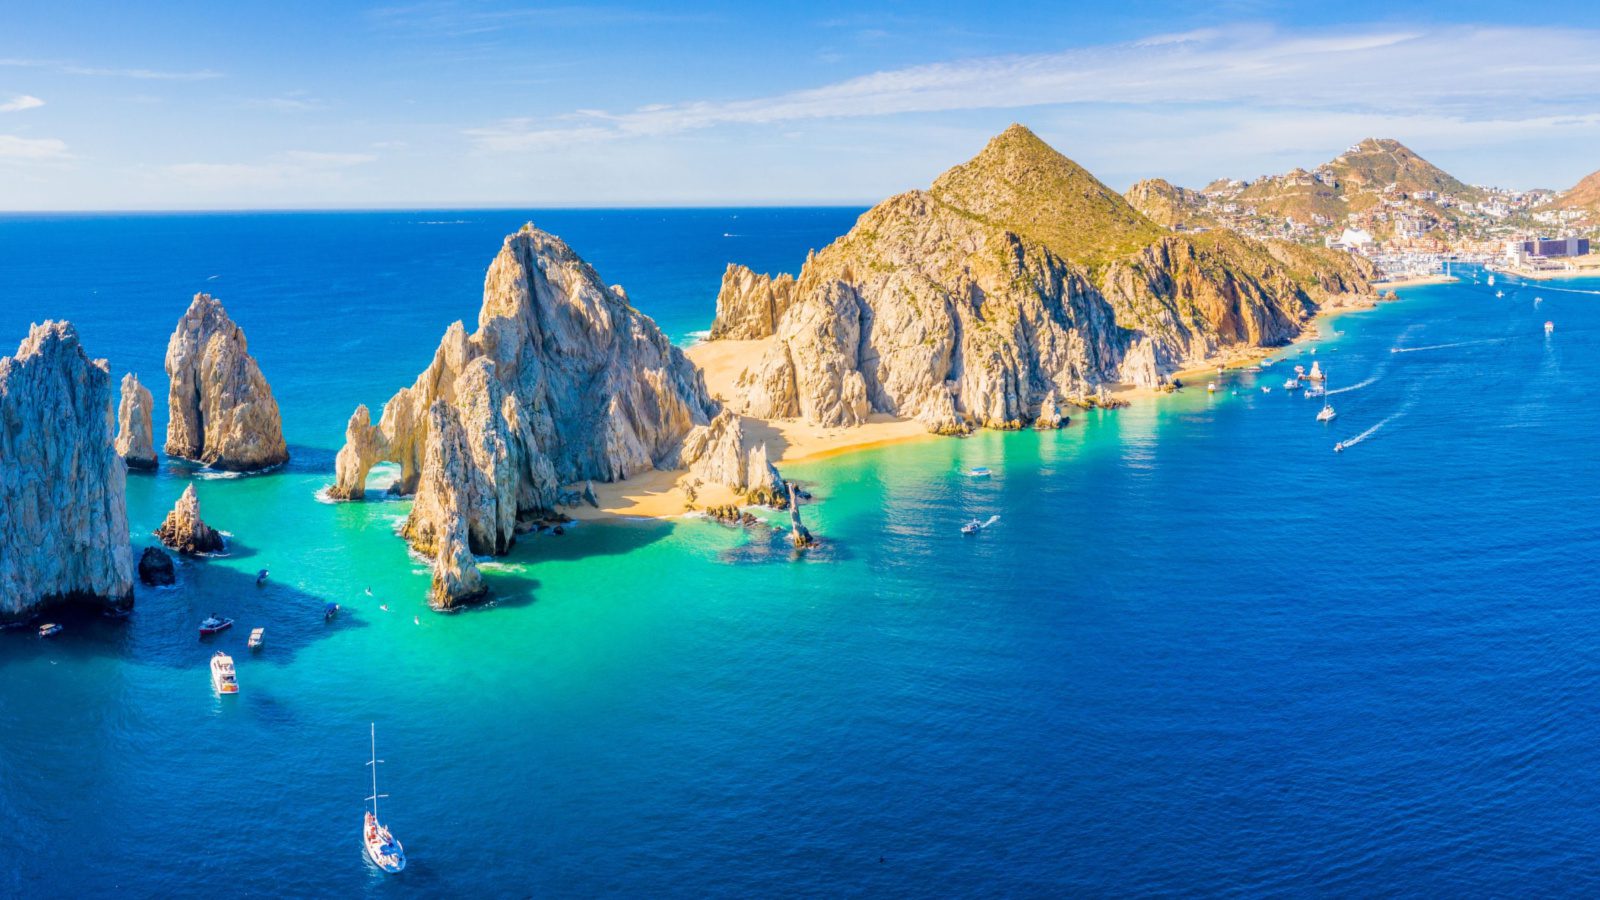 Aerial view of Lands End and El Arco at the tip of Baja California Sur in Los Cabos, Mexico (Photo: Shutterstock)